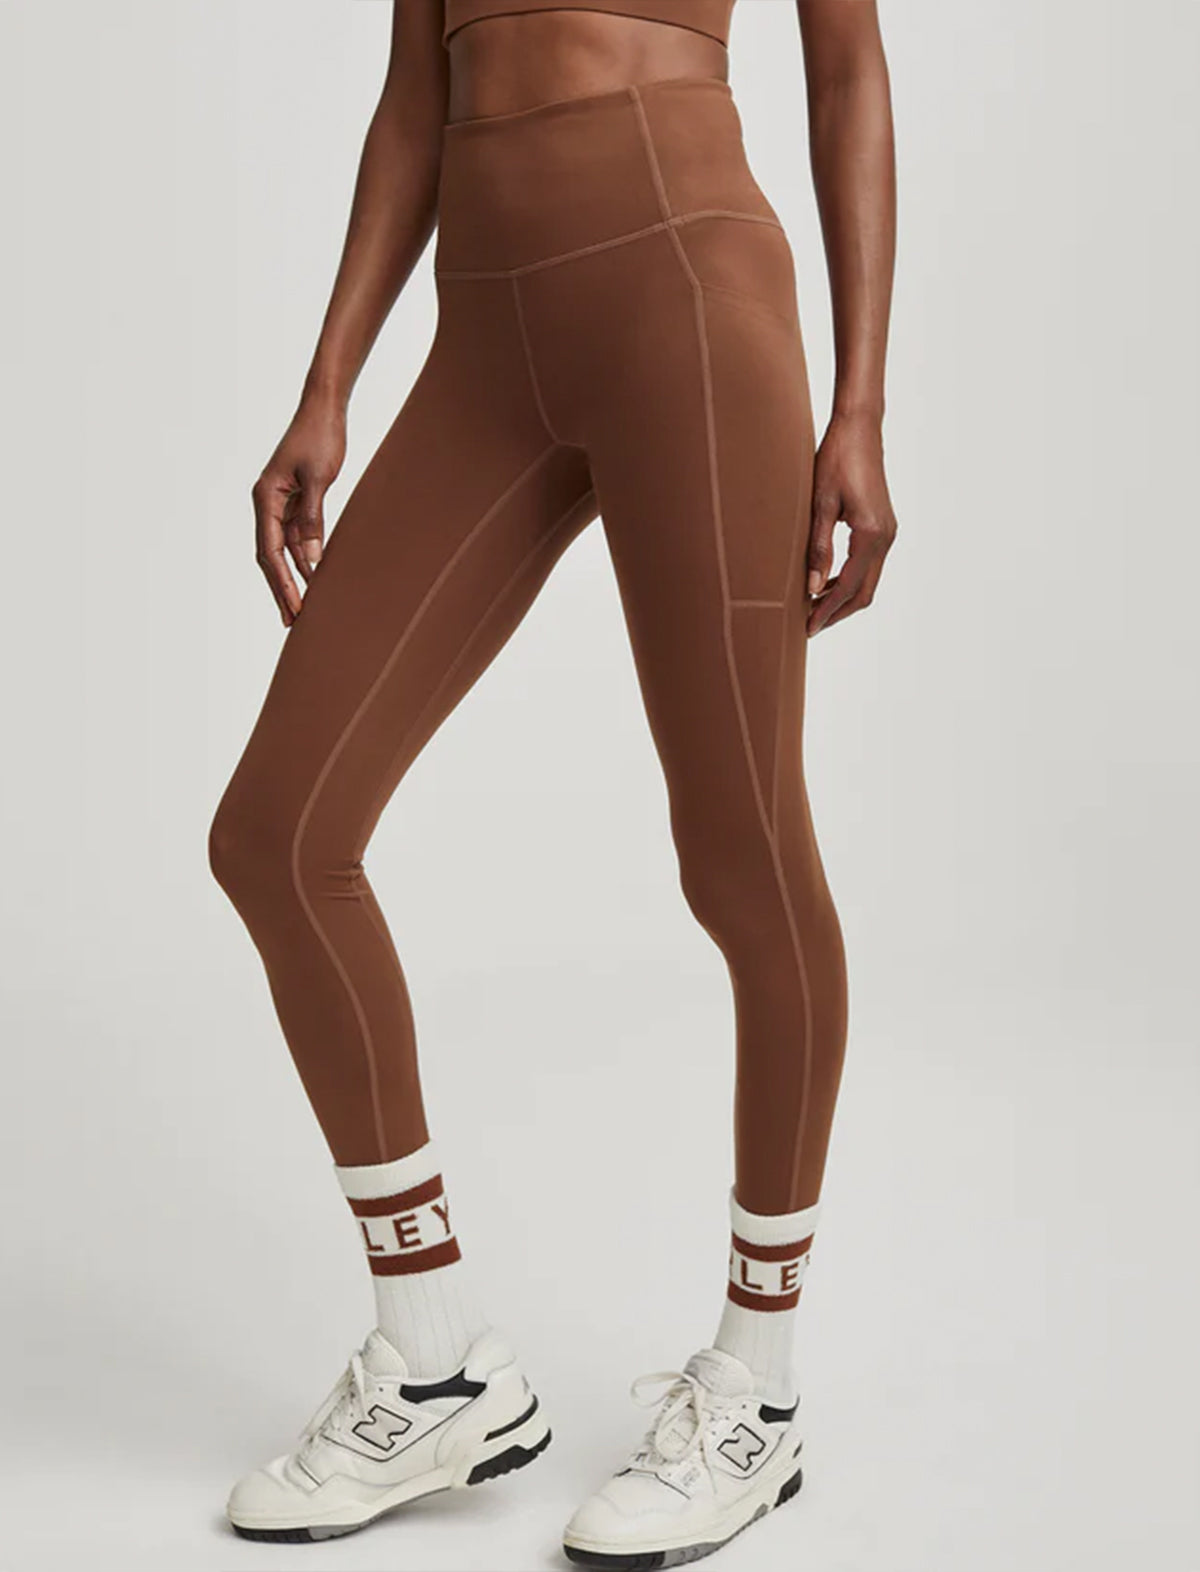 VARLEY Move Pocket Legging High 25" In Cocoa Brown